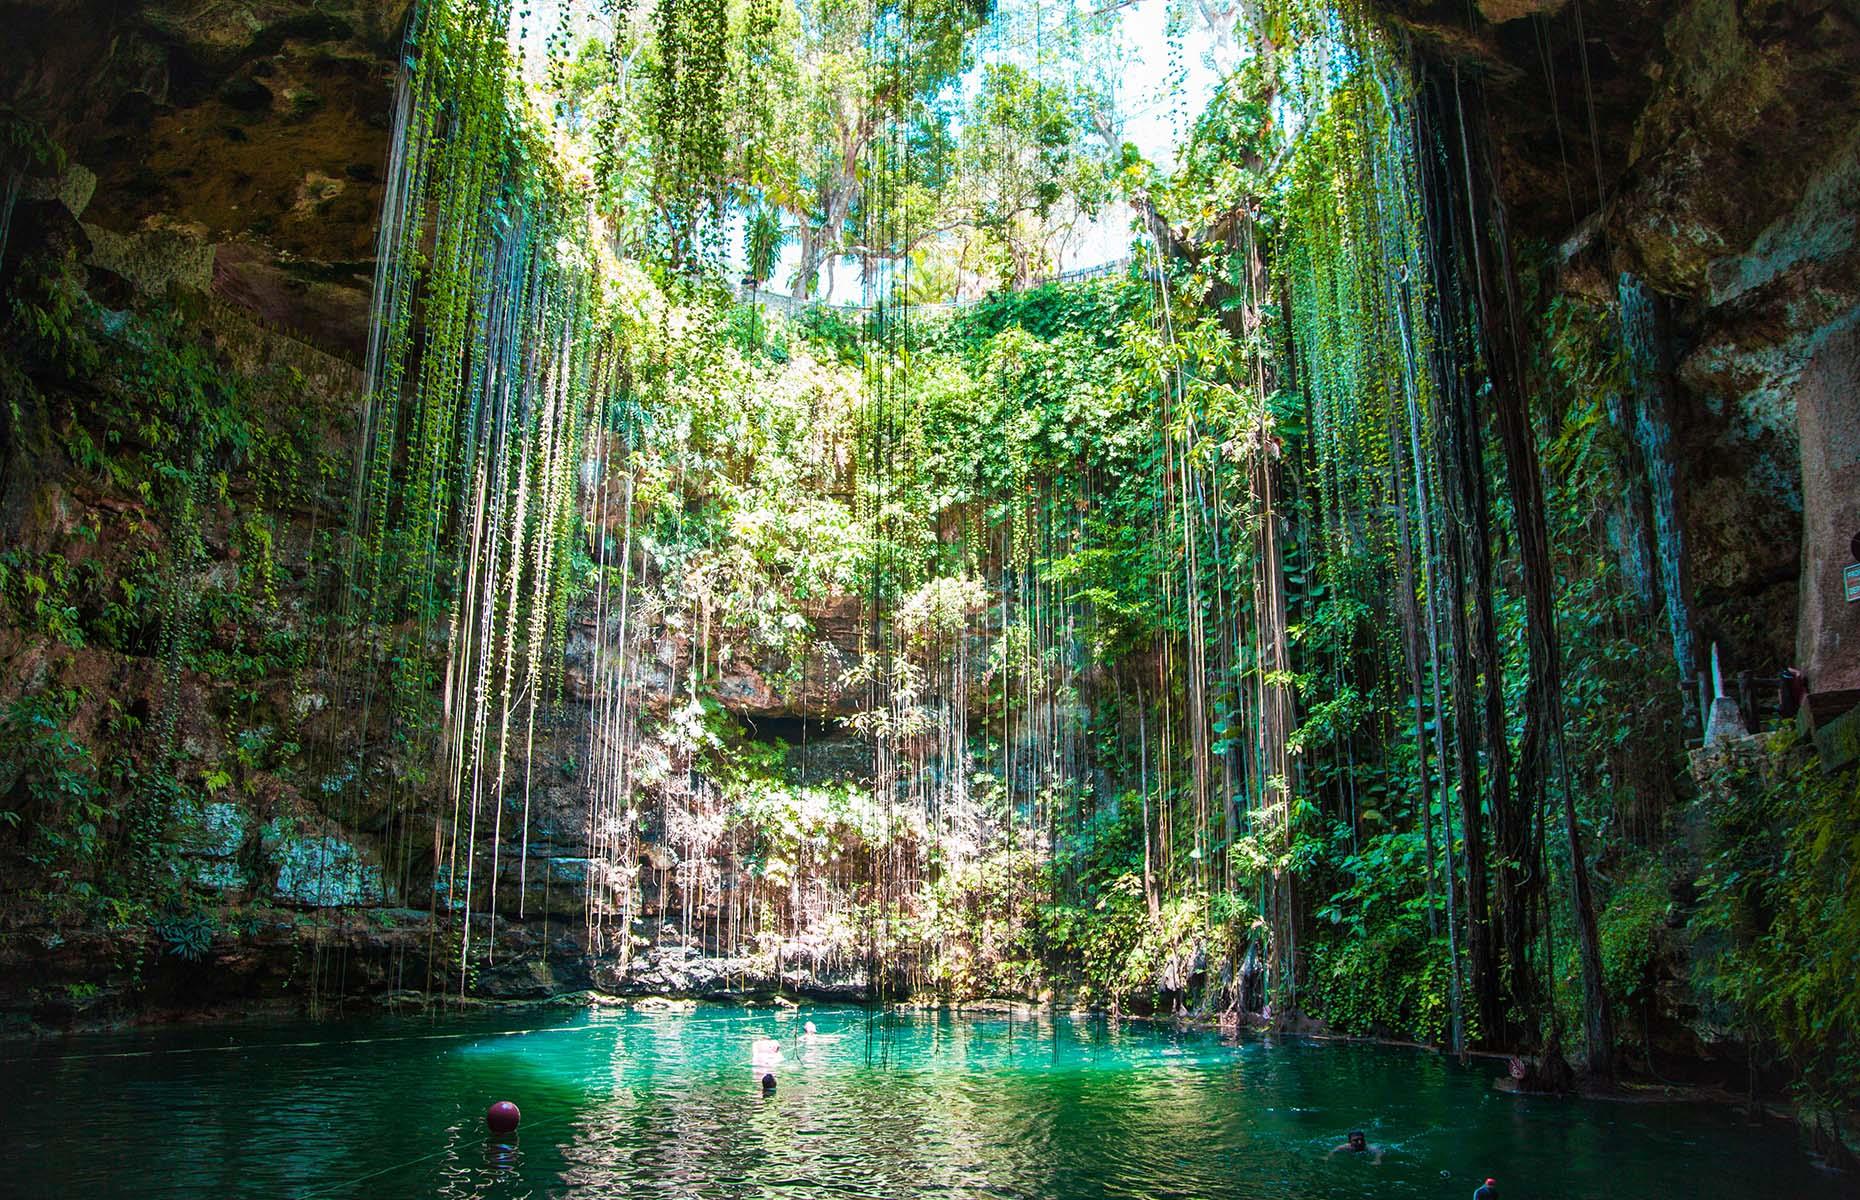 Ik Kil, a natural cenote (or sinkhole) in Yucatán, Mexico, was formed during heavy tropical rainfall which made its original limestone ceiling collapse. It's a picturesque natural attraction that really looks like it could be a passageway into a lost world. The spot is considered sacred by the Mayan people and a swim in the pool's mesmerising green waters is truly magical.